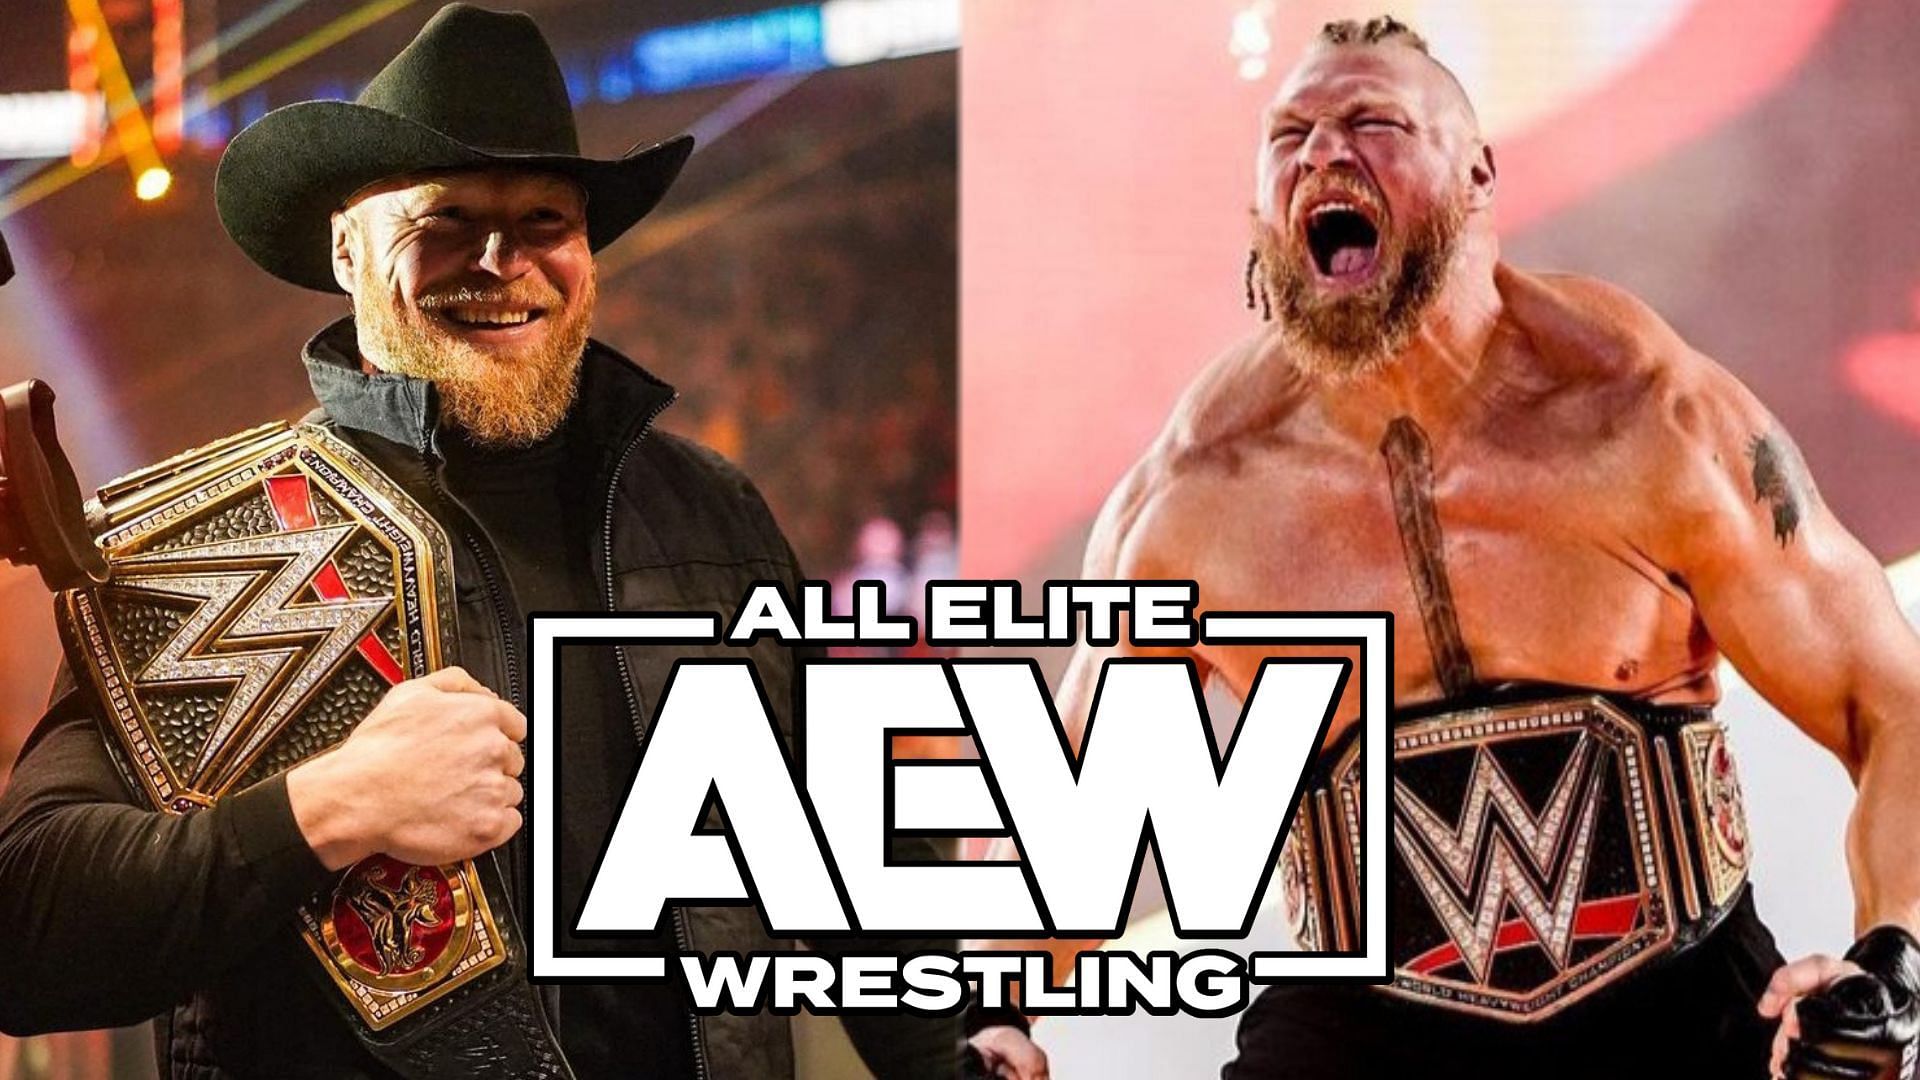 Could Brock Lesnar and this AEW star have the feud of a lifetime?